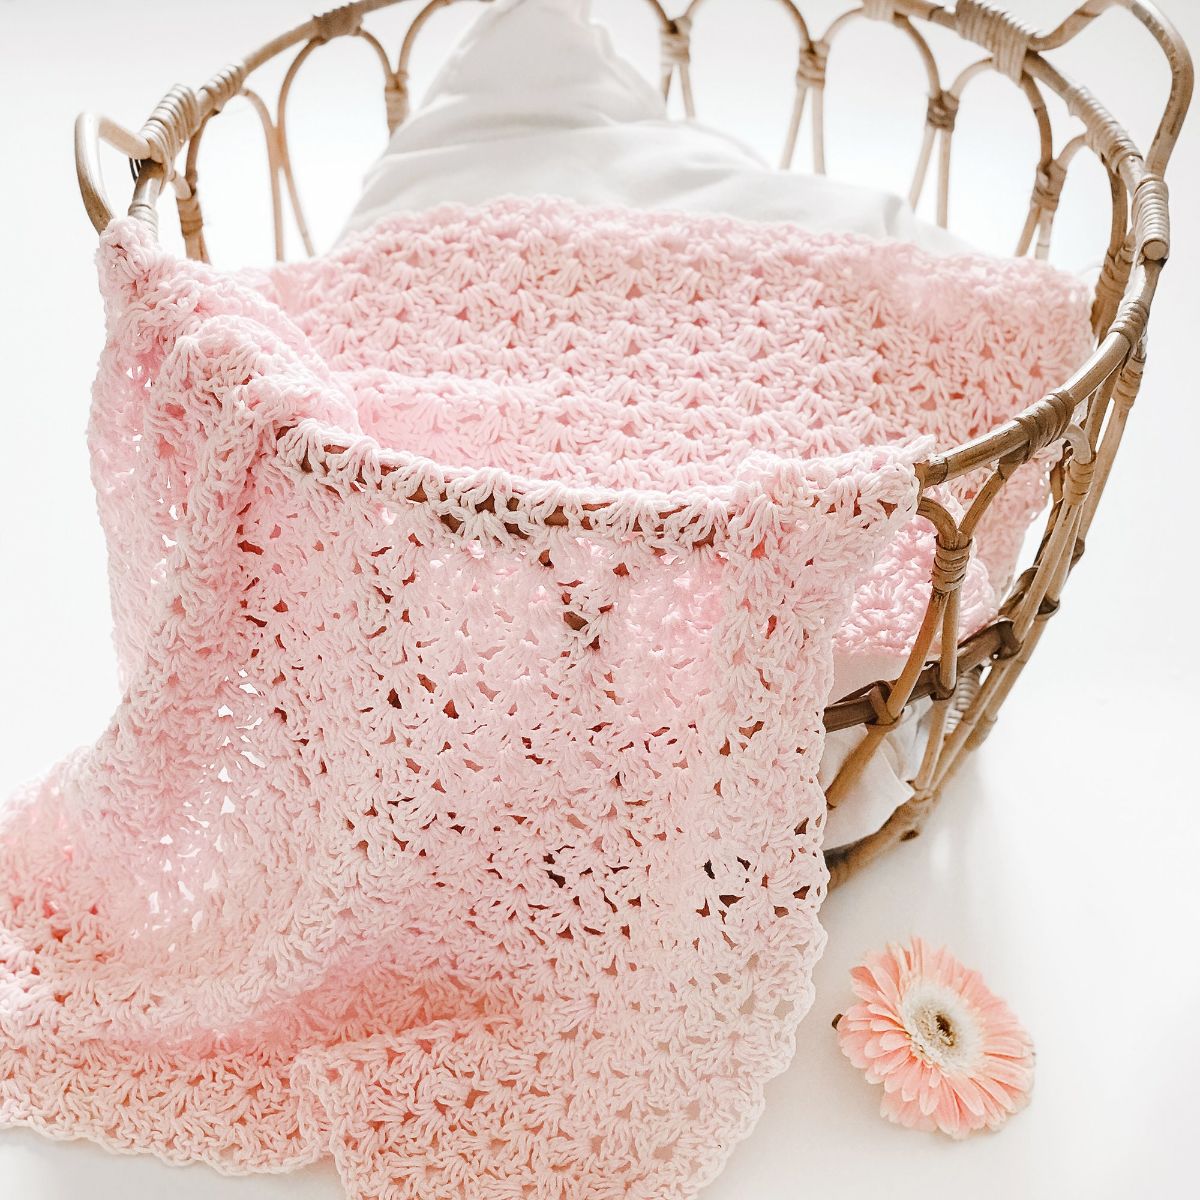 A brown wicker basket with a pink lacy crochet baby blanket spilling out of, next to a small pink flower.